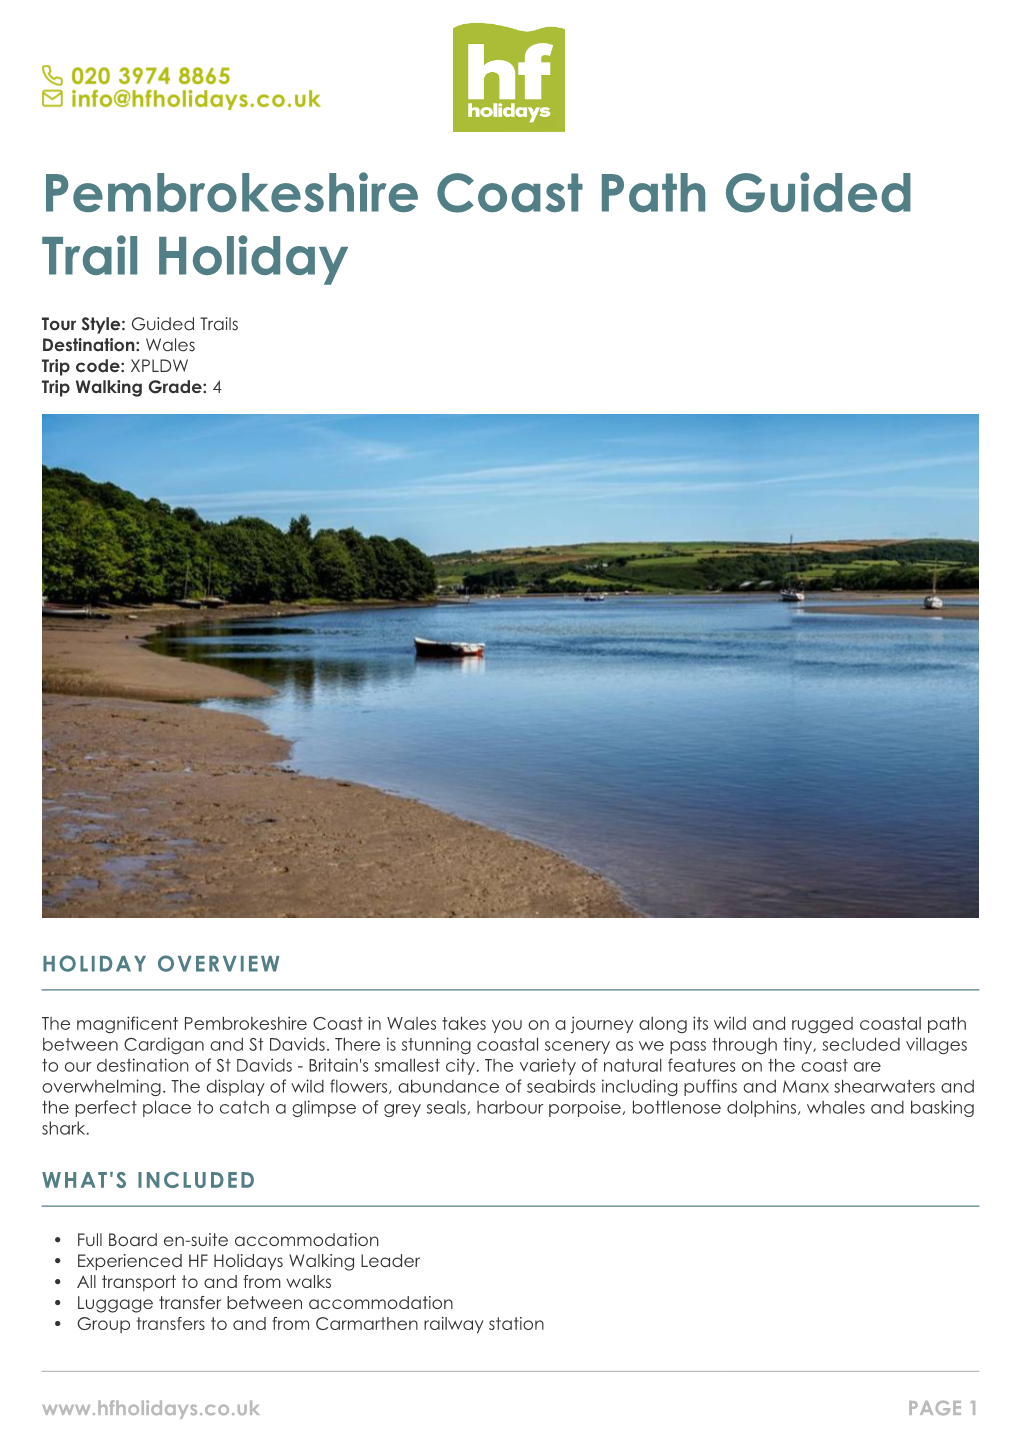 Pembrokeshire Coast Path Guided Trail Holiday